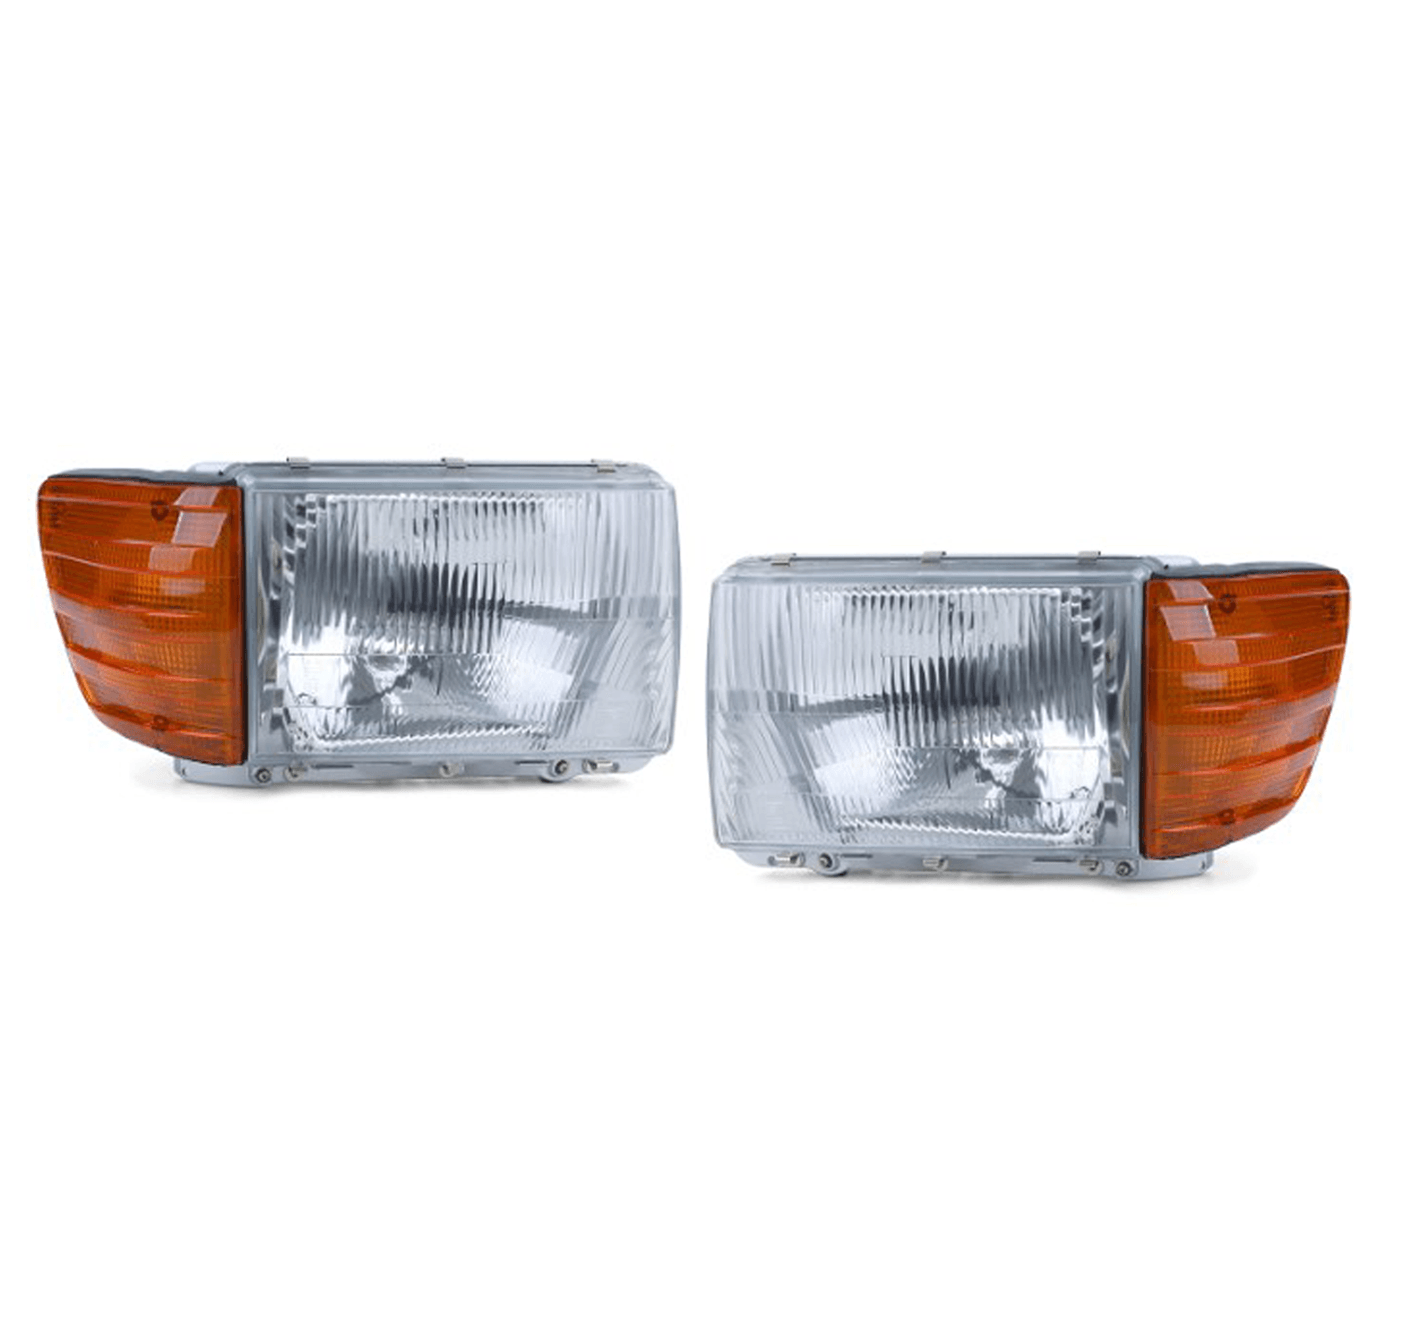 107251Set Genuine Classparts Left And Right Headlight For Mercedes-Benz - ADVANCED TRUCK PARTS